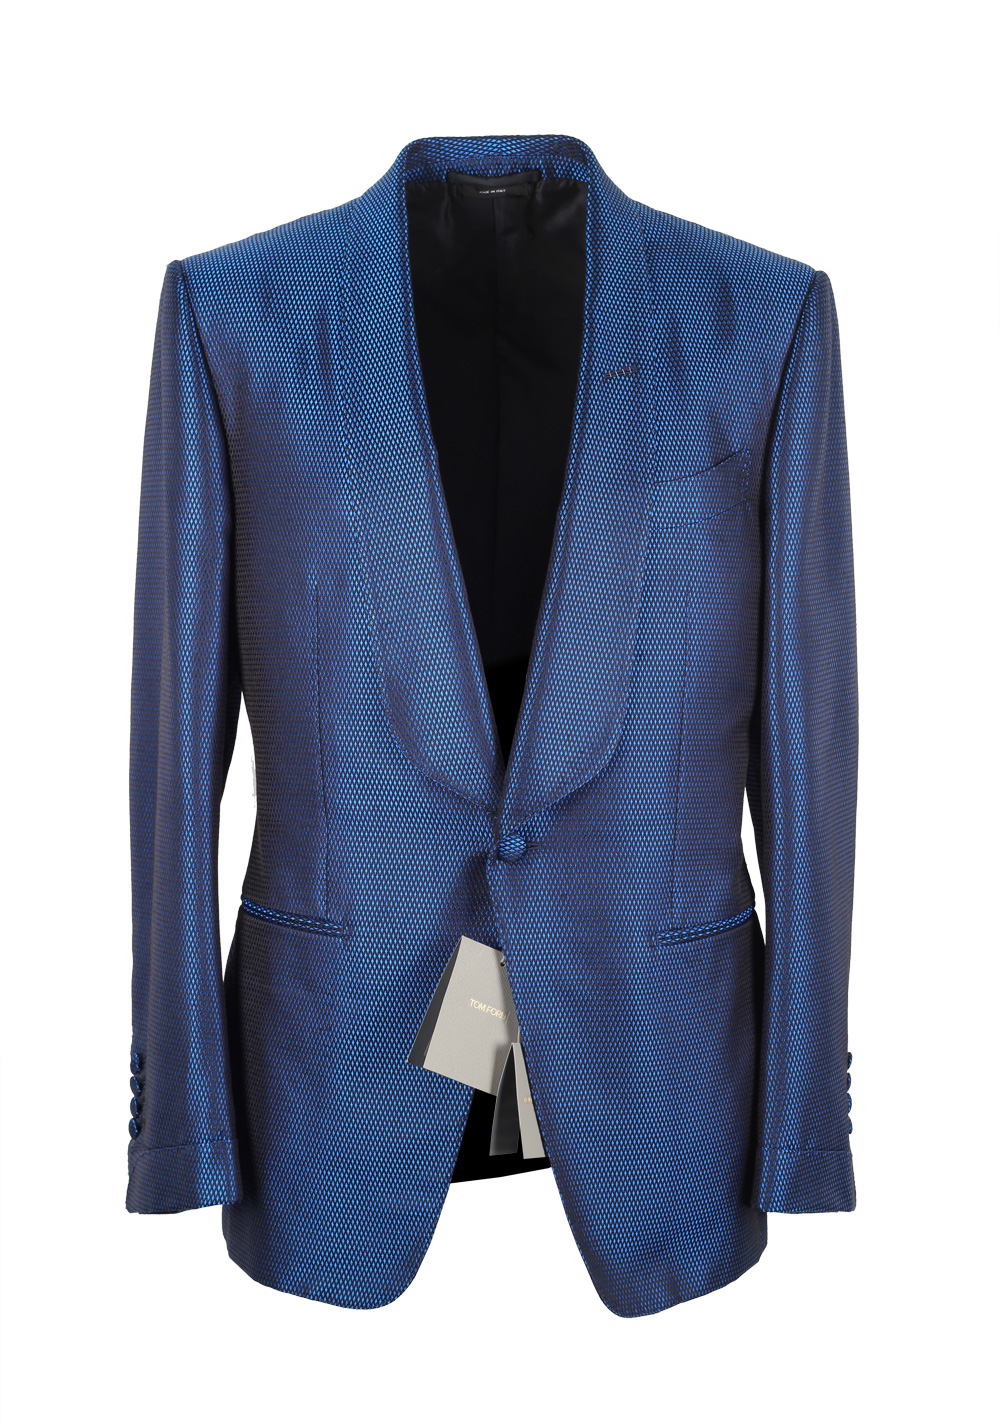 TOM FORD O’Connor Shawl Collar Blue Sport Coat Tuxedo Dinner Jacket Size 48 / 38R U.S. Fit Y | Costume Limité